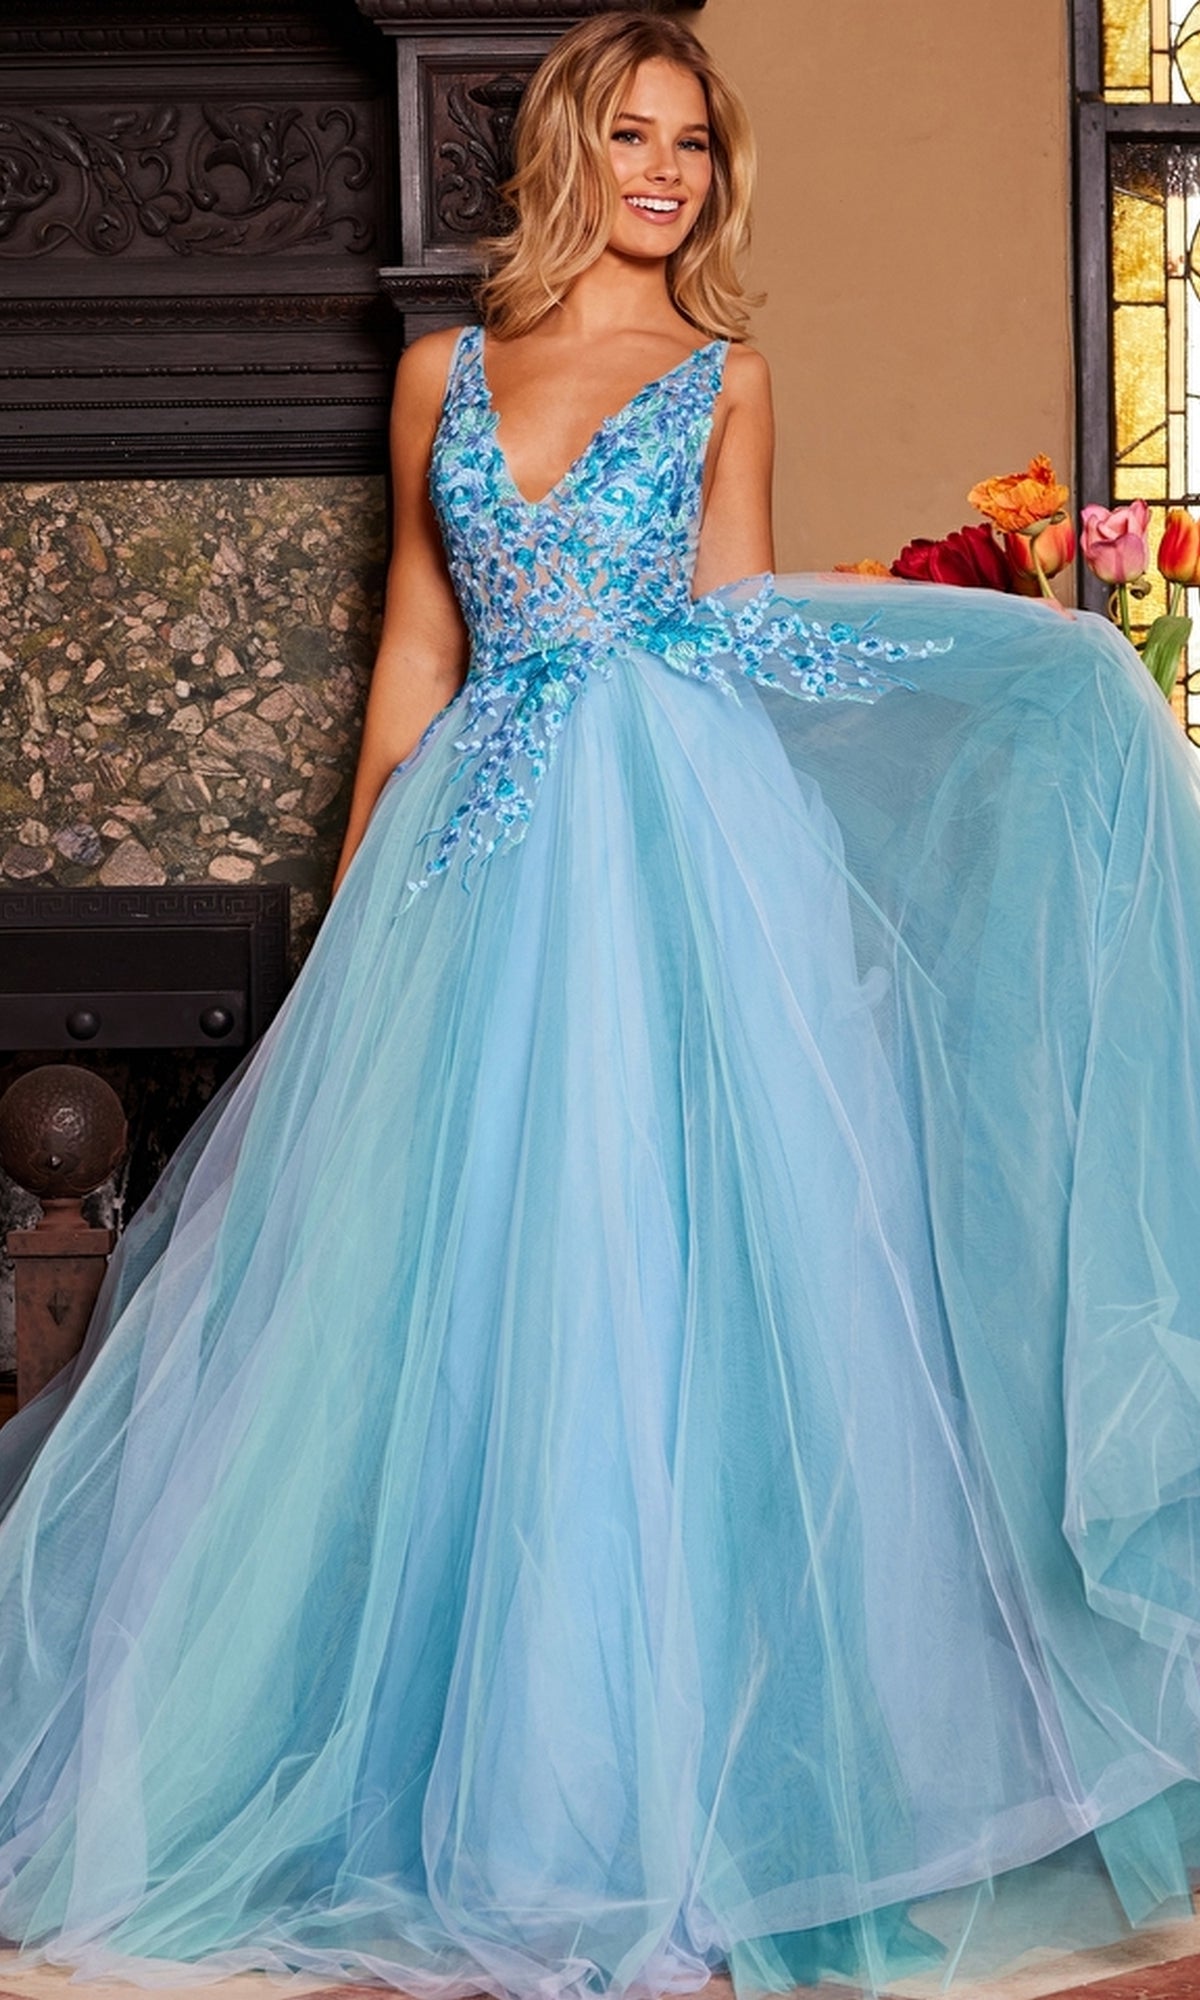 Jovani Tulle Prom Ball Gown with Floral Embroidery